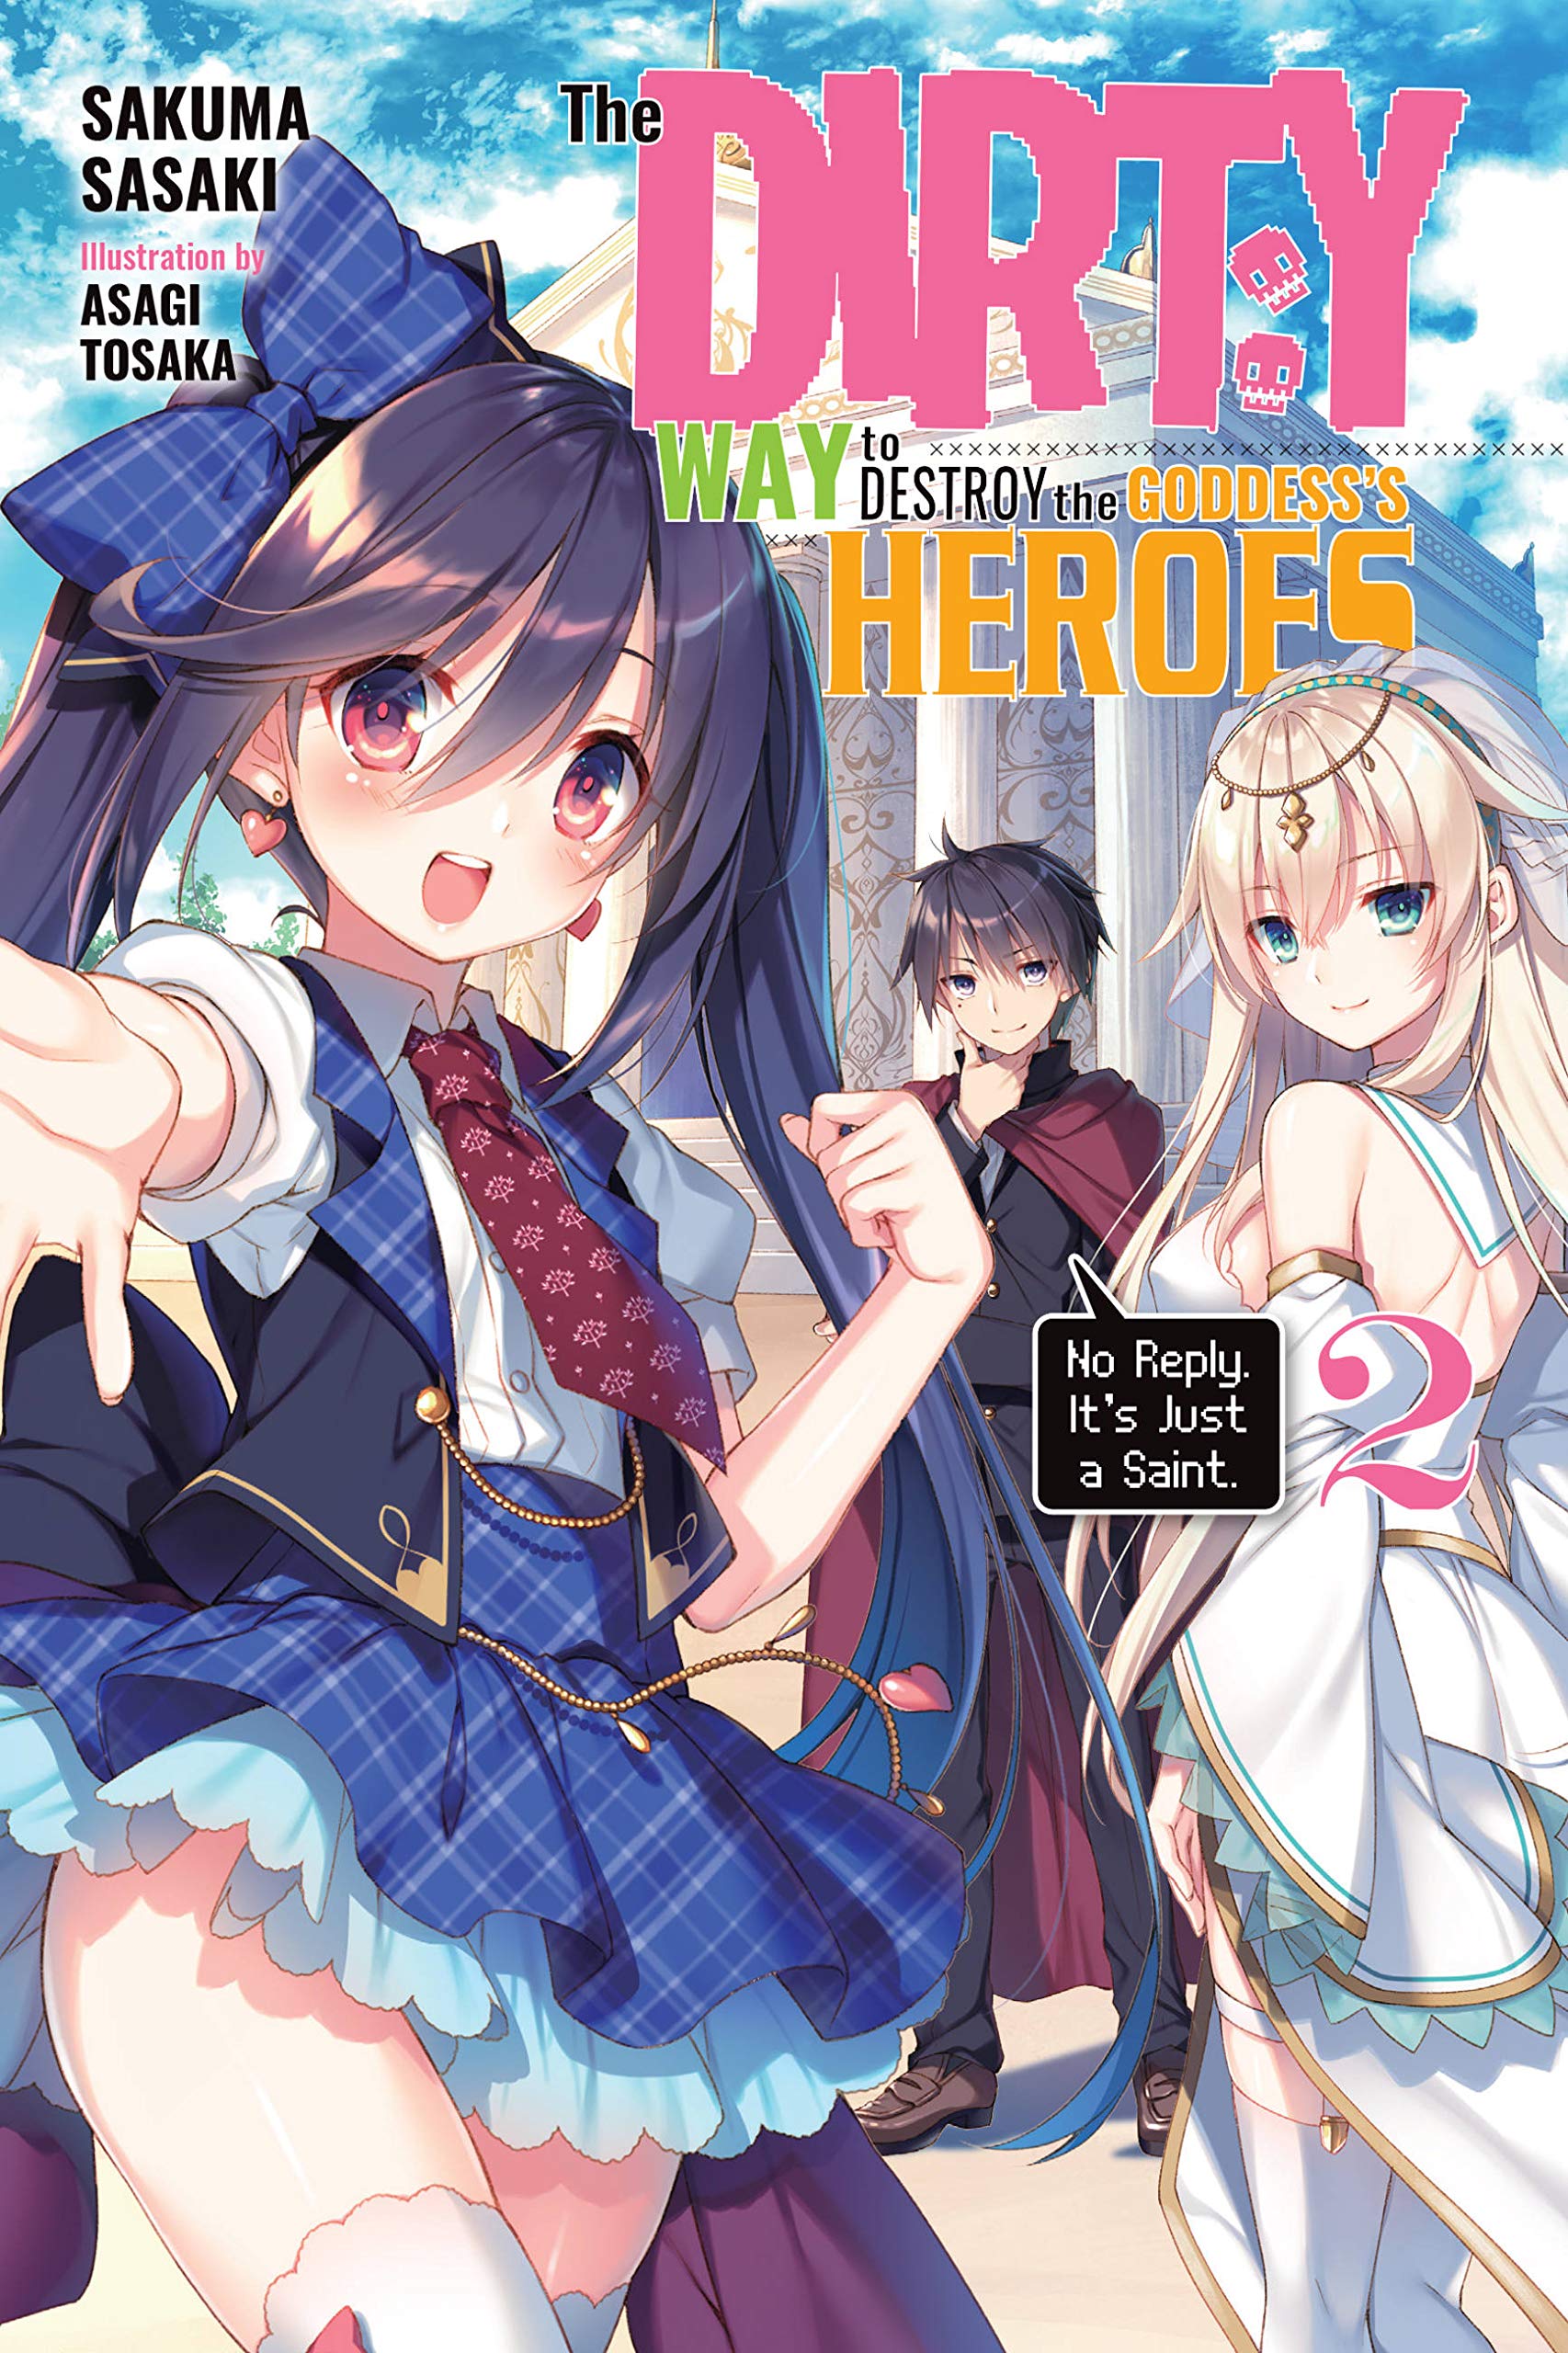 The Dirty Way to Destroy the Goddess&#039;s Heroes - Volume 2 (Light Novel)